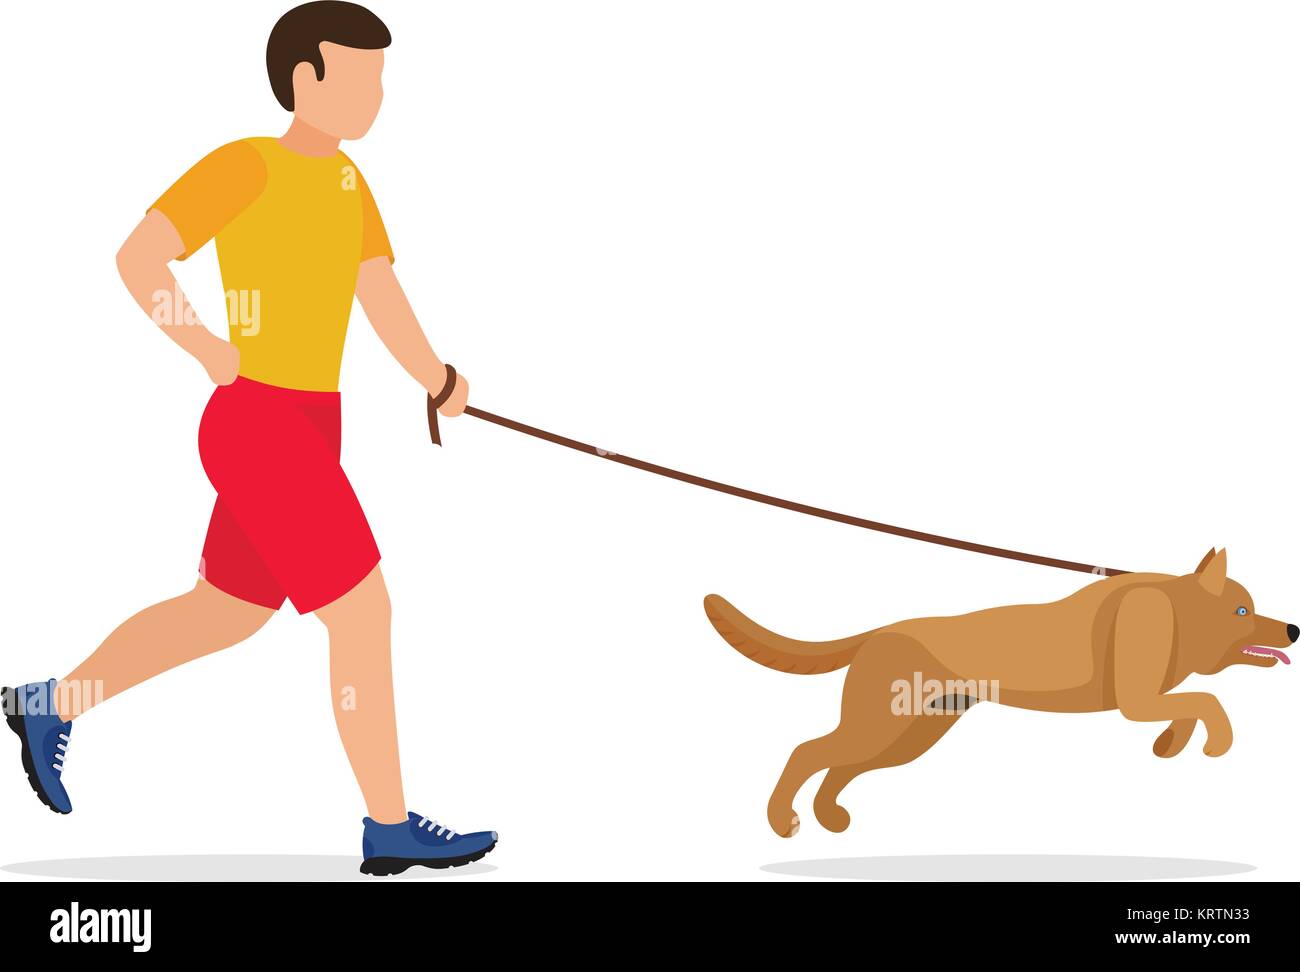 Man walking or running with a dog. Vector illustration. Stock Vector